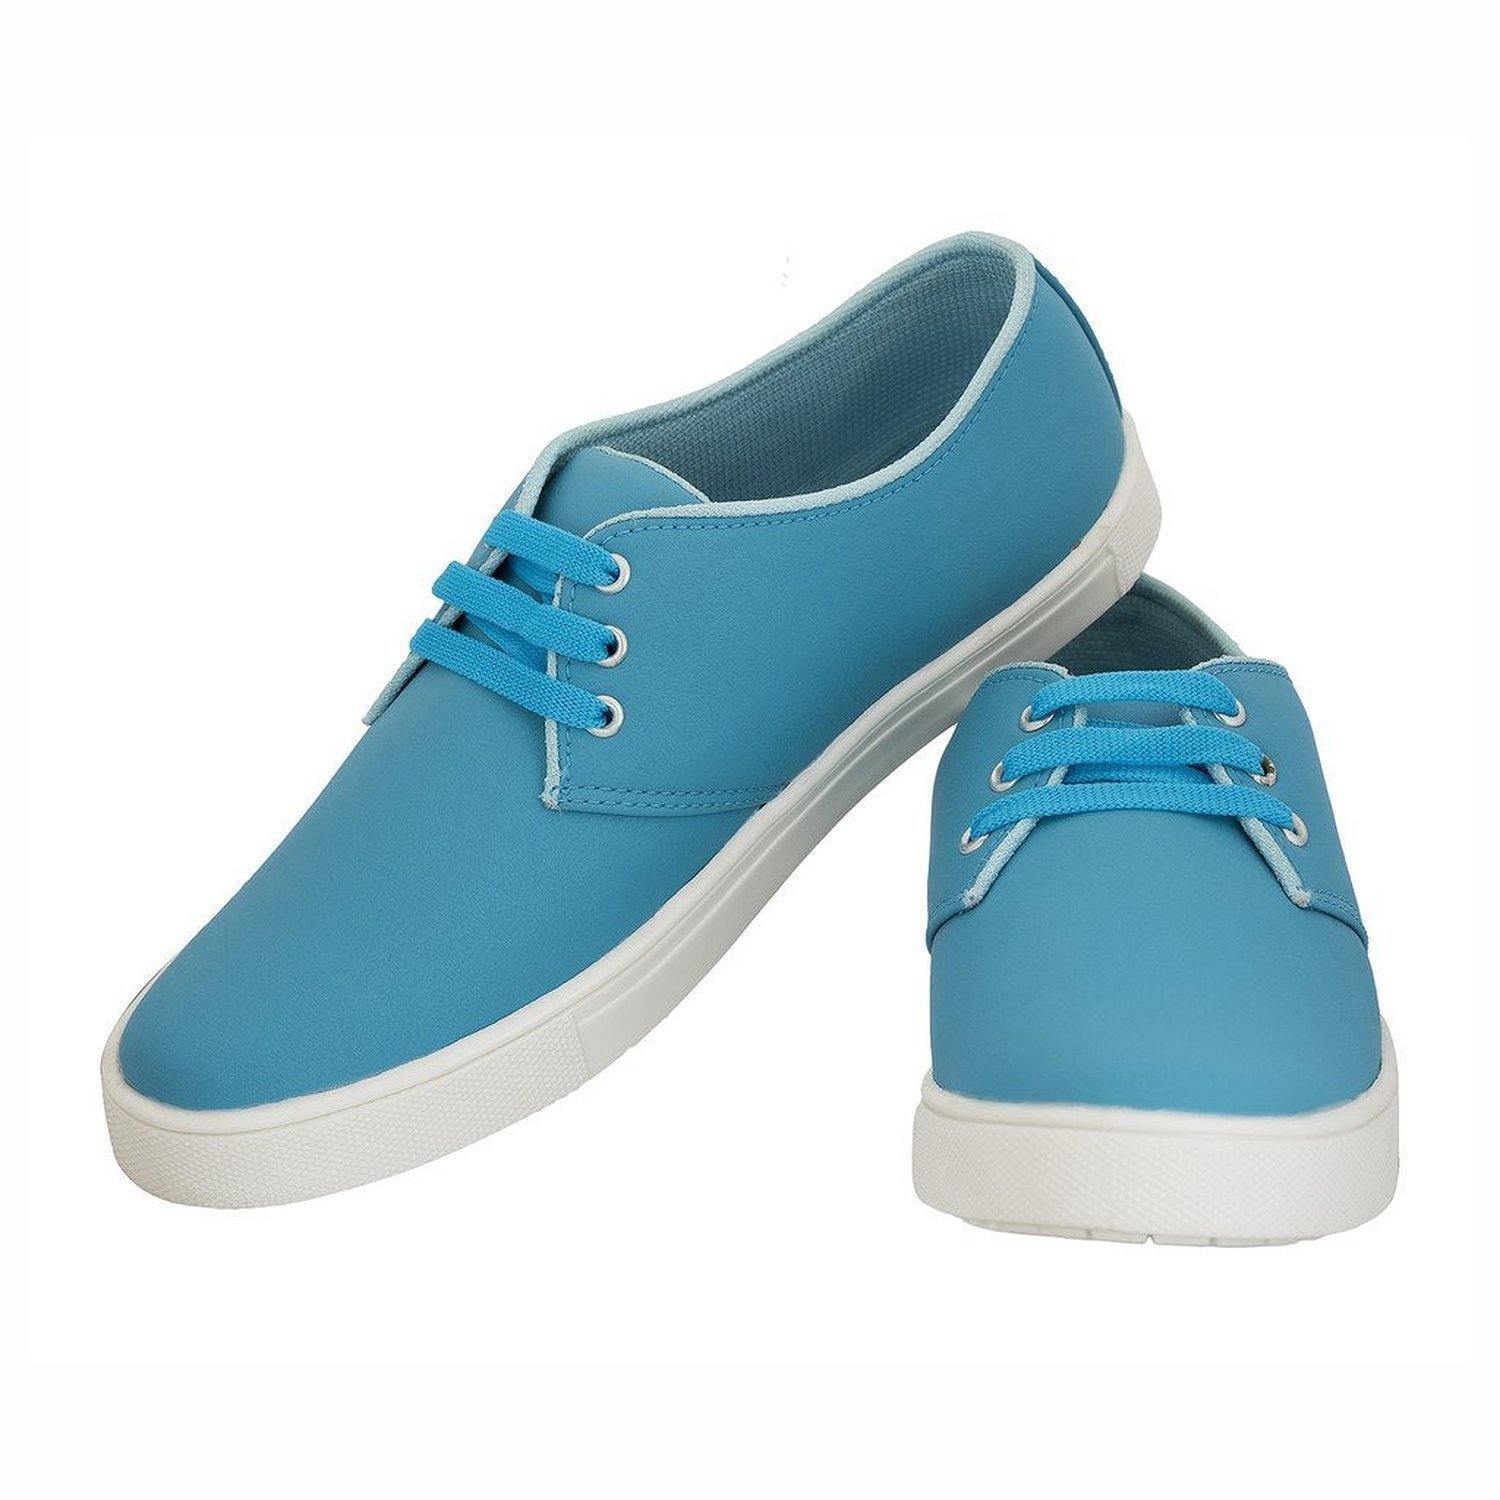 Red Rose Men's Blue Stylish Casual Shoes: Buy Online at Low Prices ...